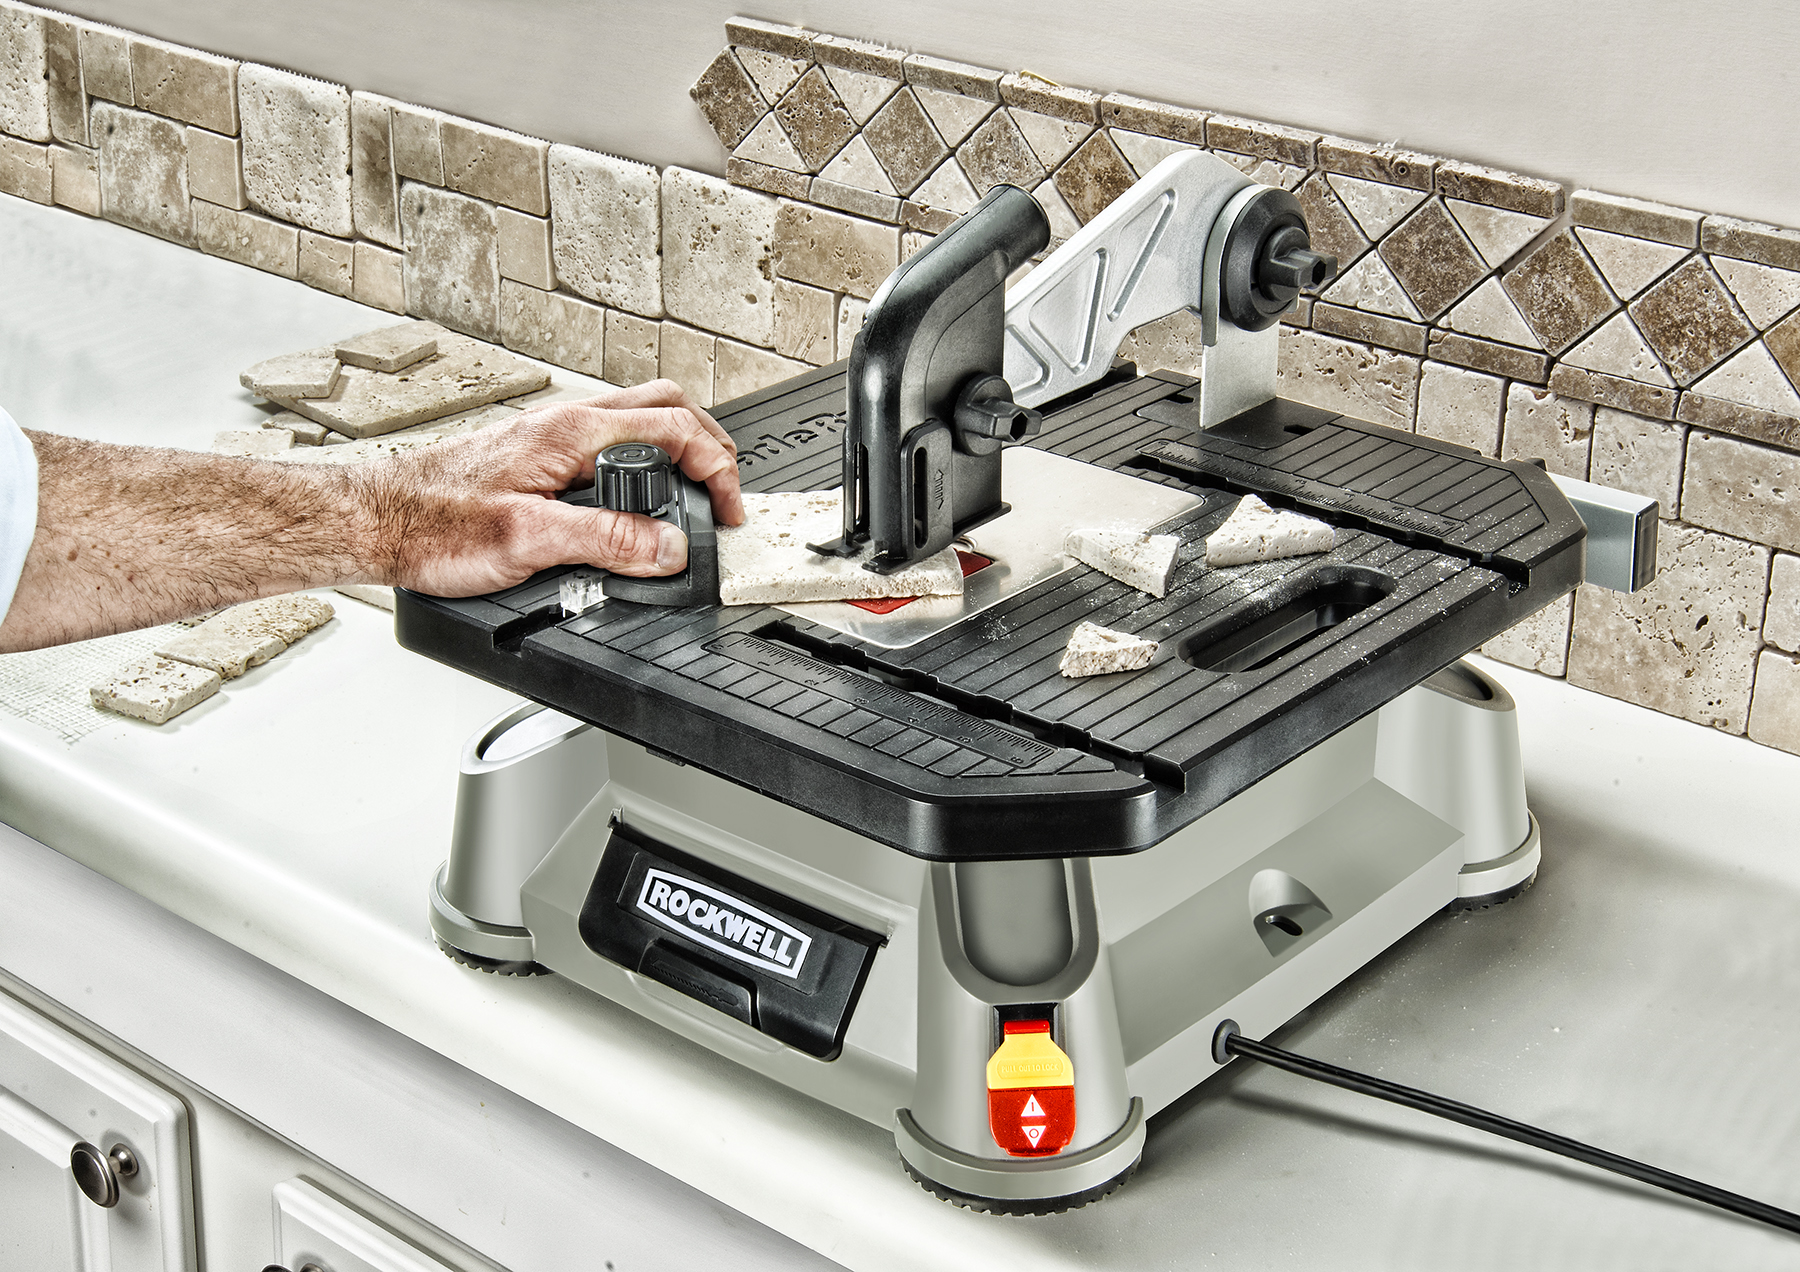 Rockwell BladeRunner X2 quickly cuts ceramic tile.